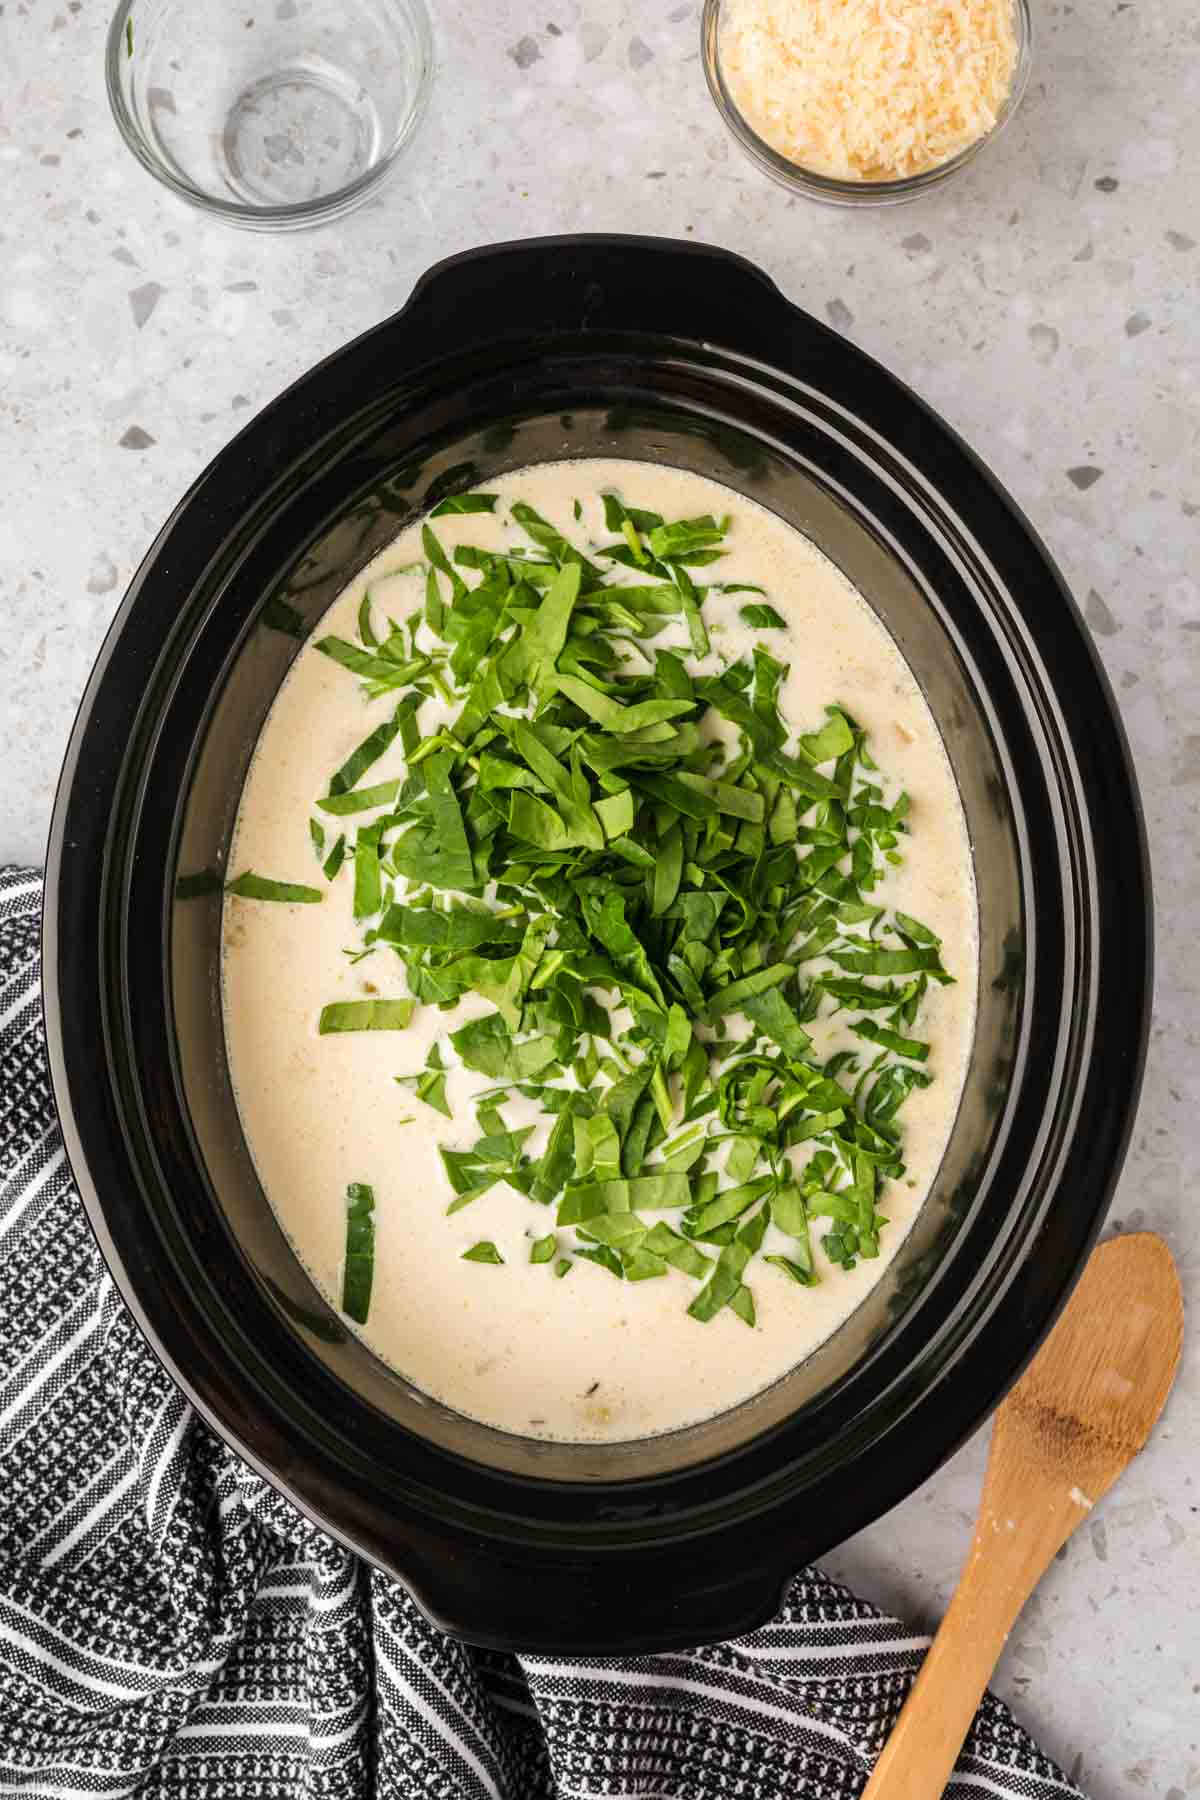 Stir in chopped spinach and parmesan cheese in the slow cooker